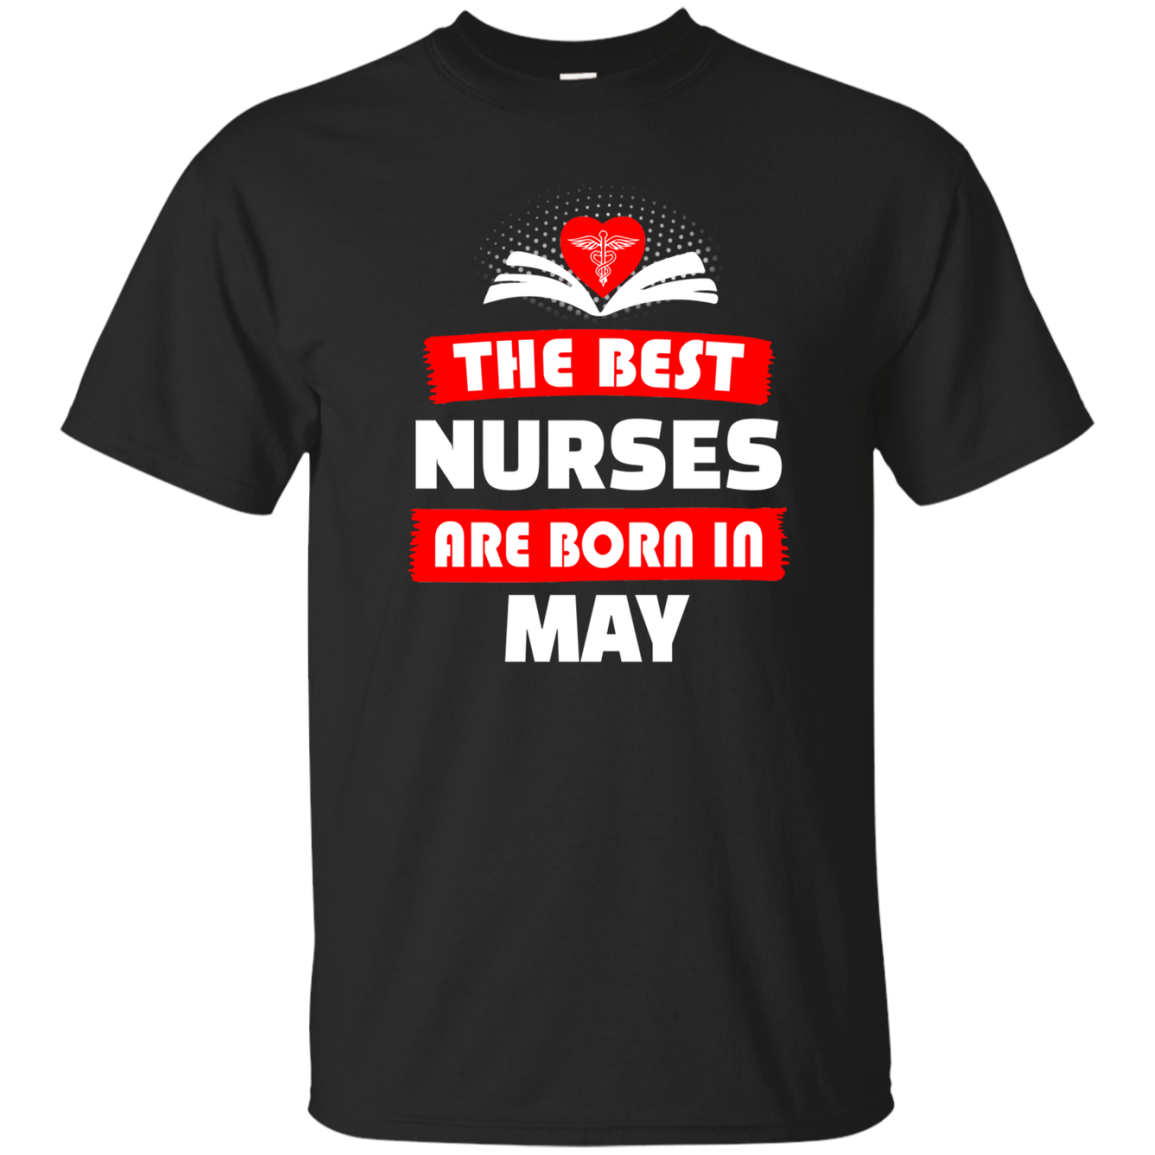 The best Nurses are born in May shirt, hoodie, tank